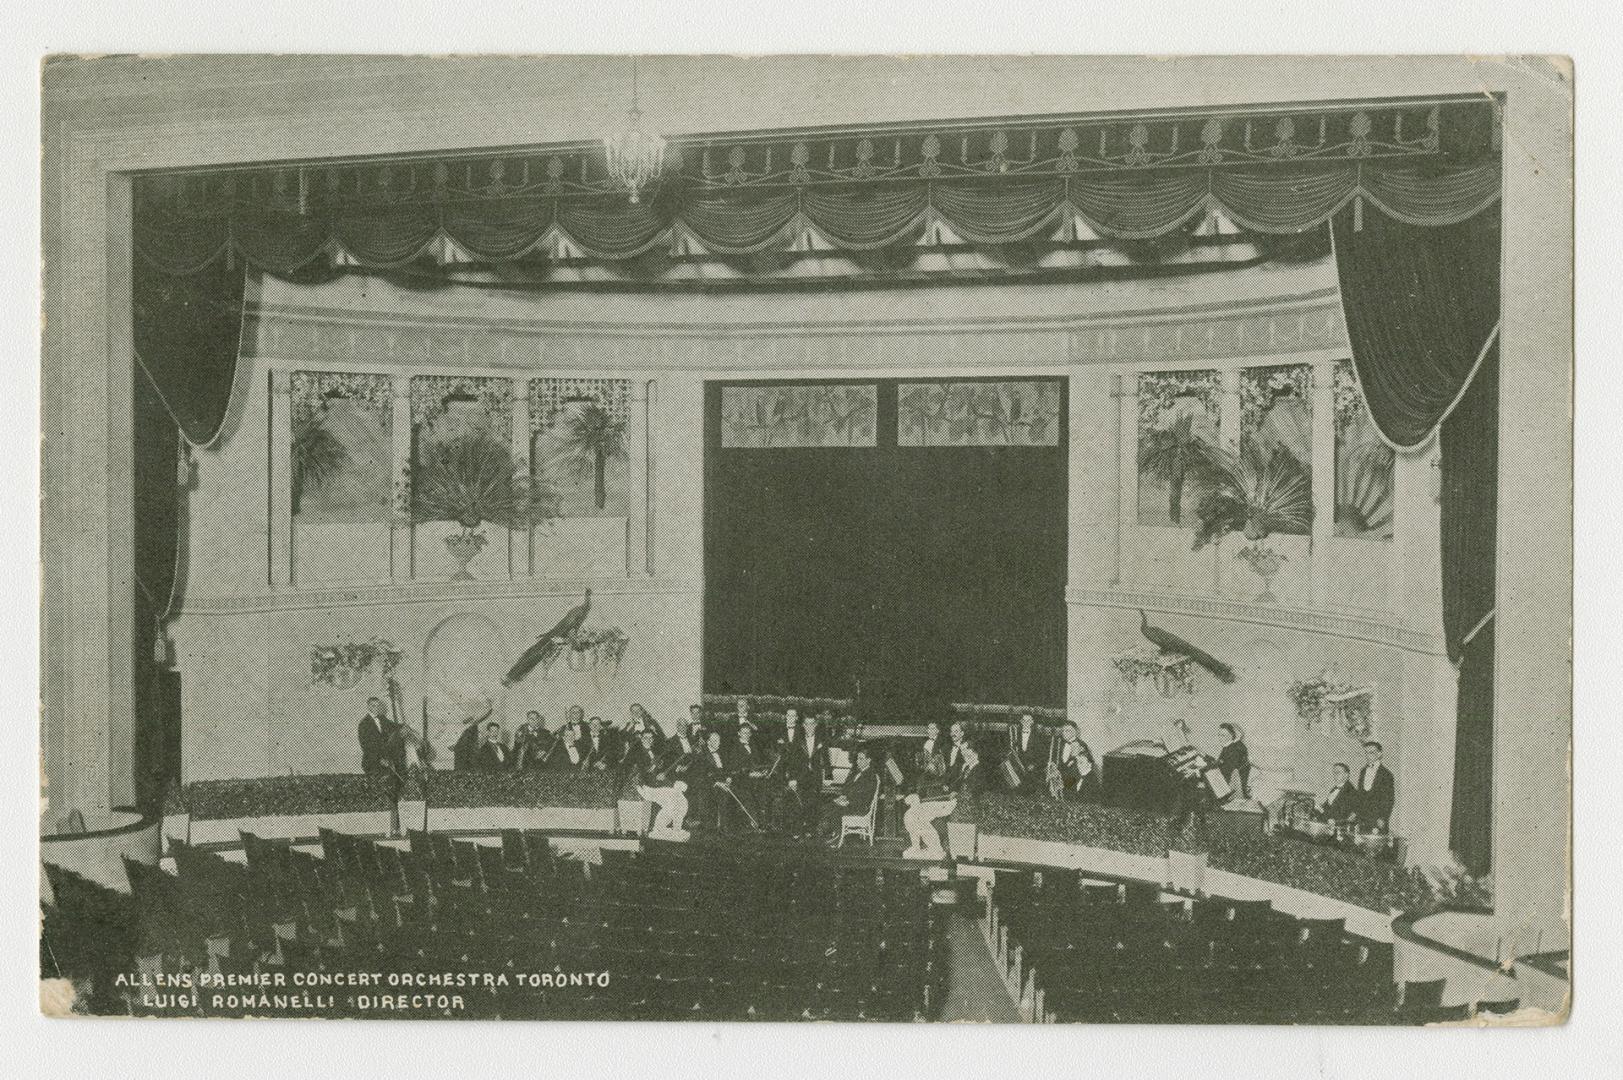 Picture of interior of a theatre with orchestra members. 